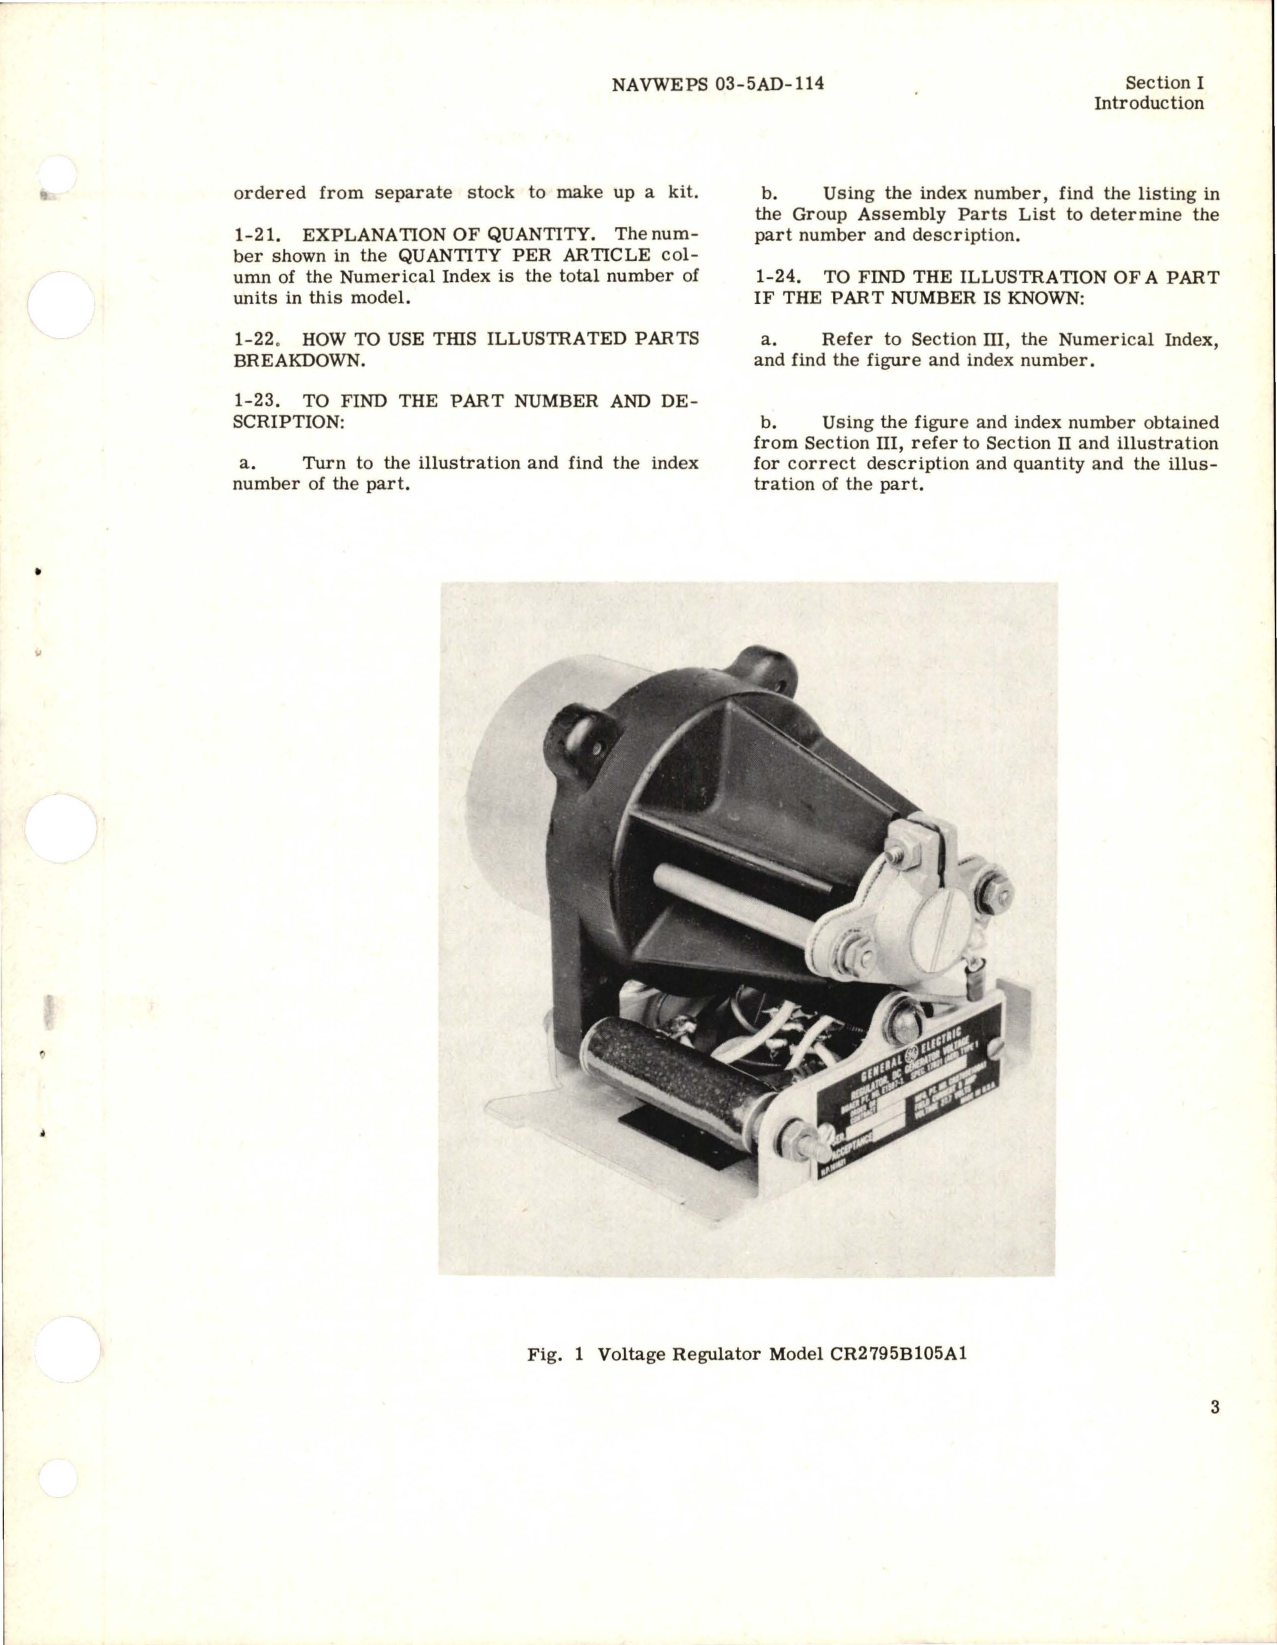 Sample page 5 from AirCorps Library document: Illustrated Parts Breakdown for Voltage Regulator - Models CR2795B105A1, CR2795B105B1, CR2795B105C1, and CR2795B105D1